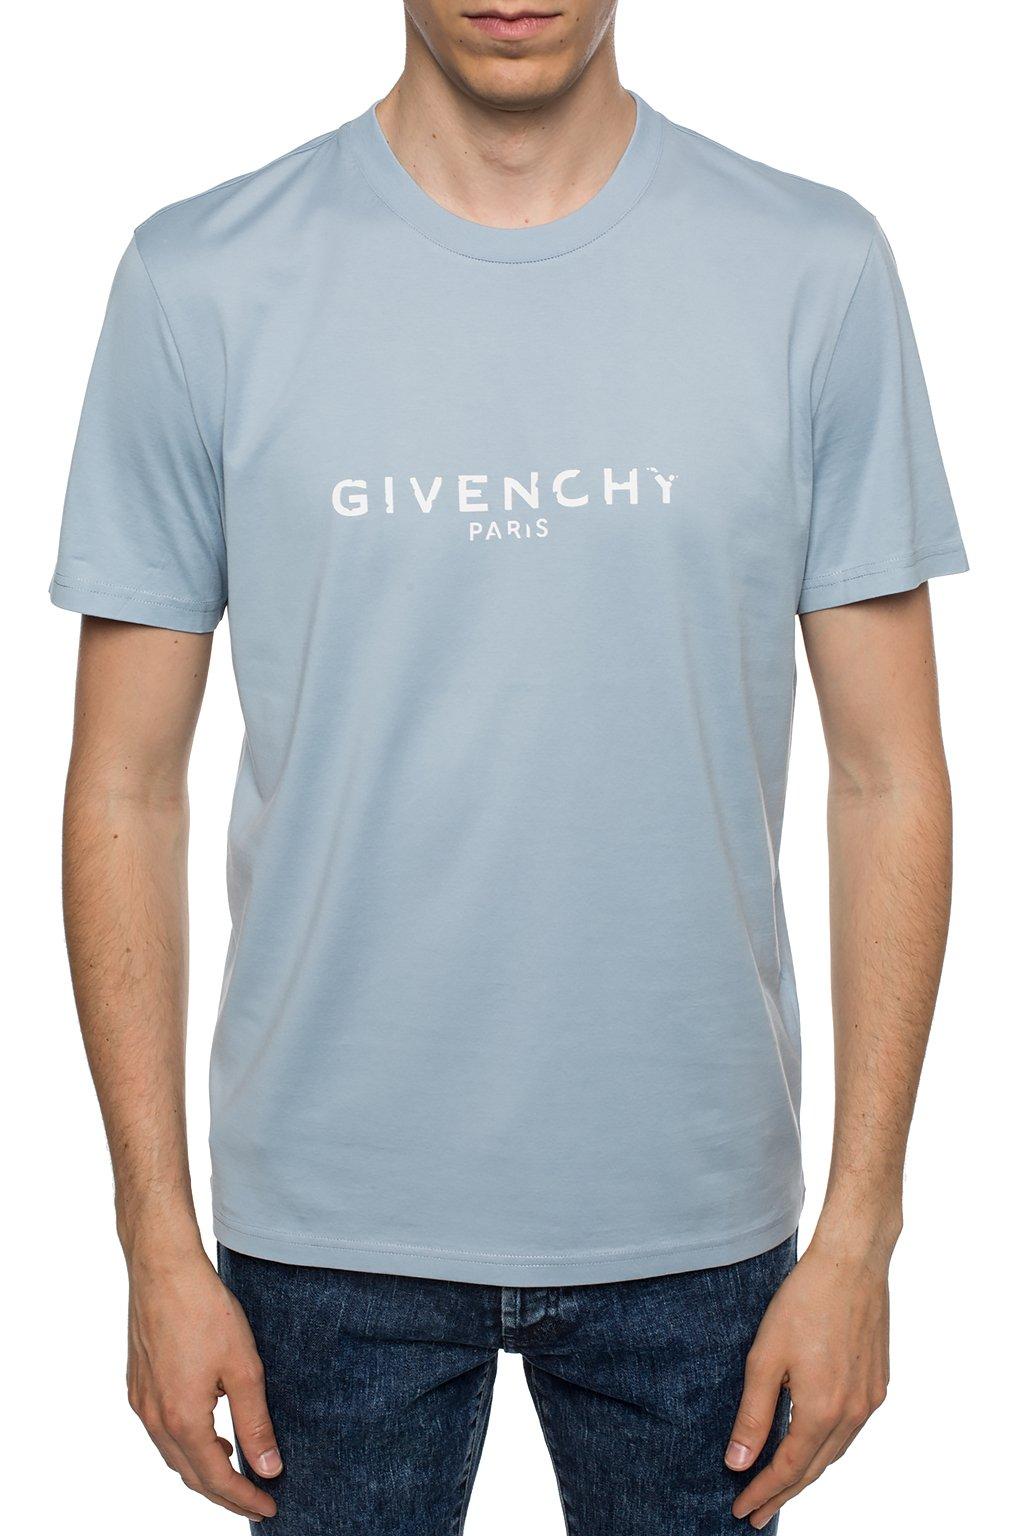 givenchy baby blue t shirt